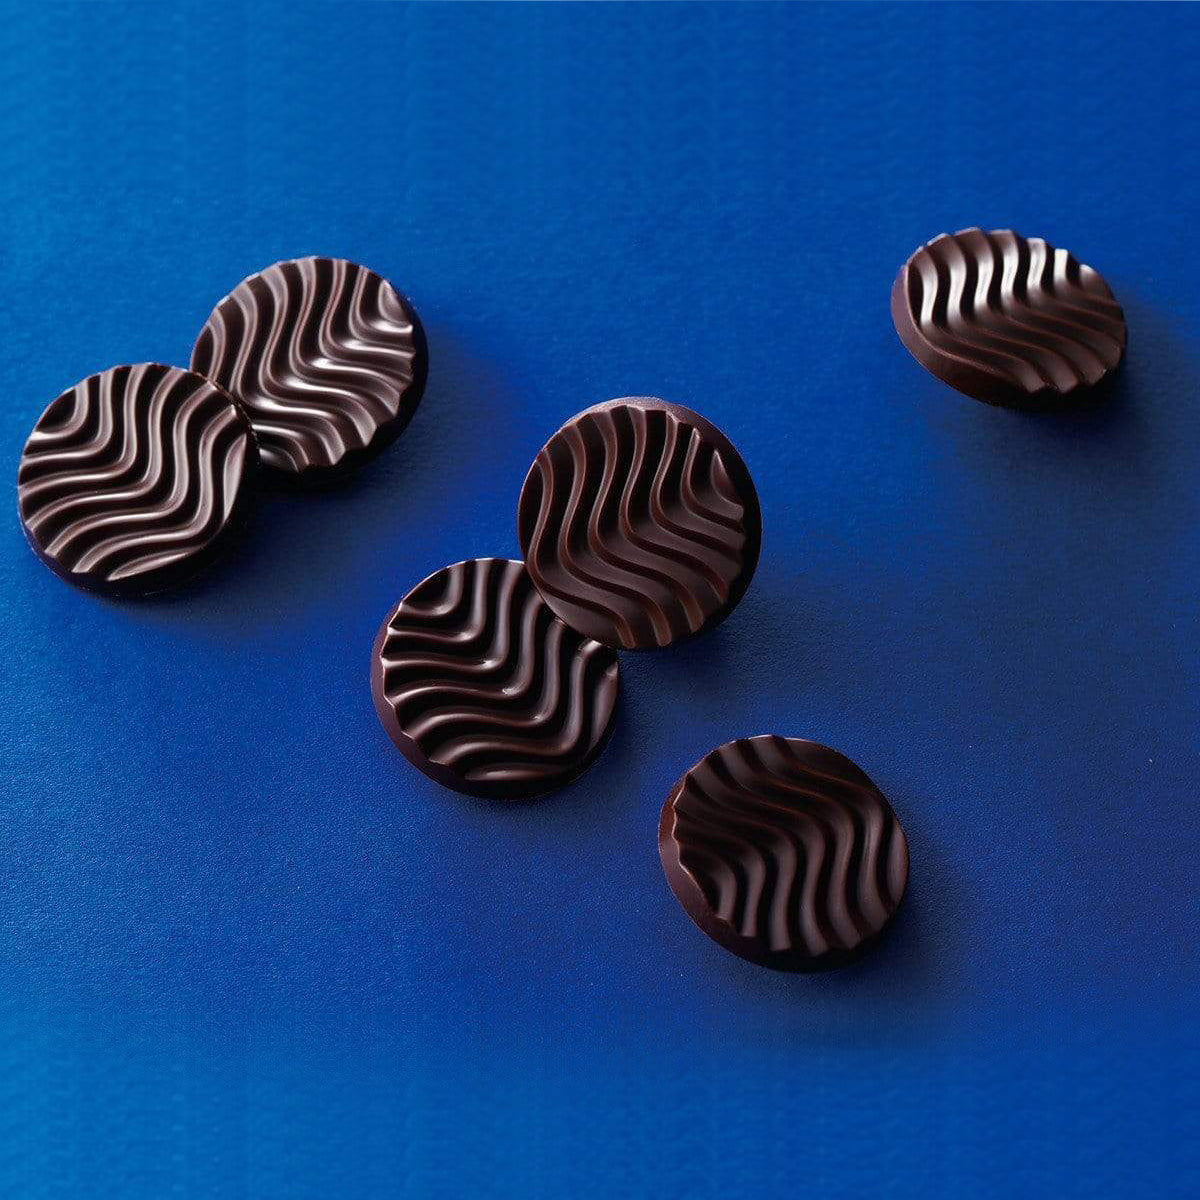 ROYCE' Chocolate - Pure Chocolate "Venezuela Bitter" - Image shows dark brown chocolate discs with waved texture. Background and surface is in blue color.